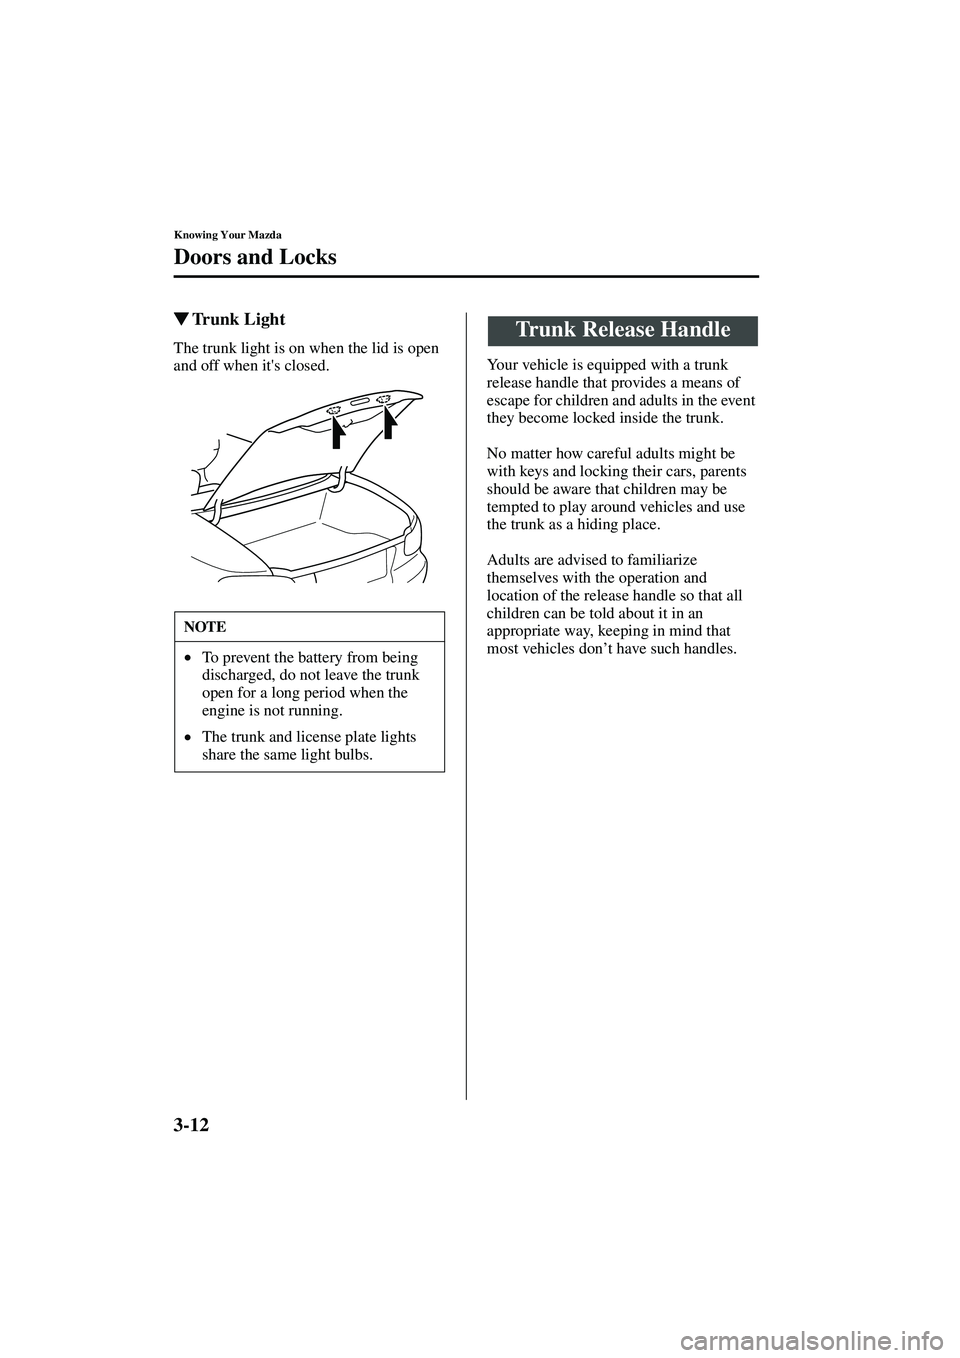 MAZDA MODEL MX-5 MIATA 2004  Owners Manual 3-12
Knowing Your Mazda
Doors and Locks
Form No. 8S15-EA-03G
Trunk Light
The trunk light is on when the lid is open 
and off when its closed.   Your vehicle is equipped with a trunk 
release handle 